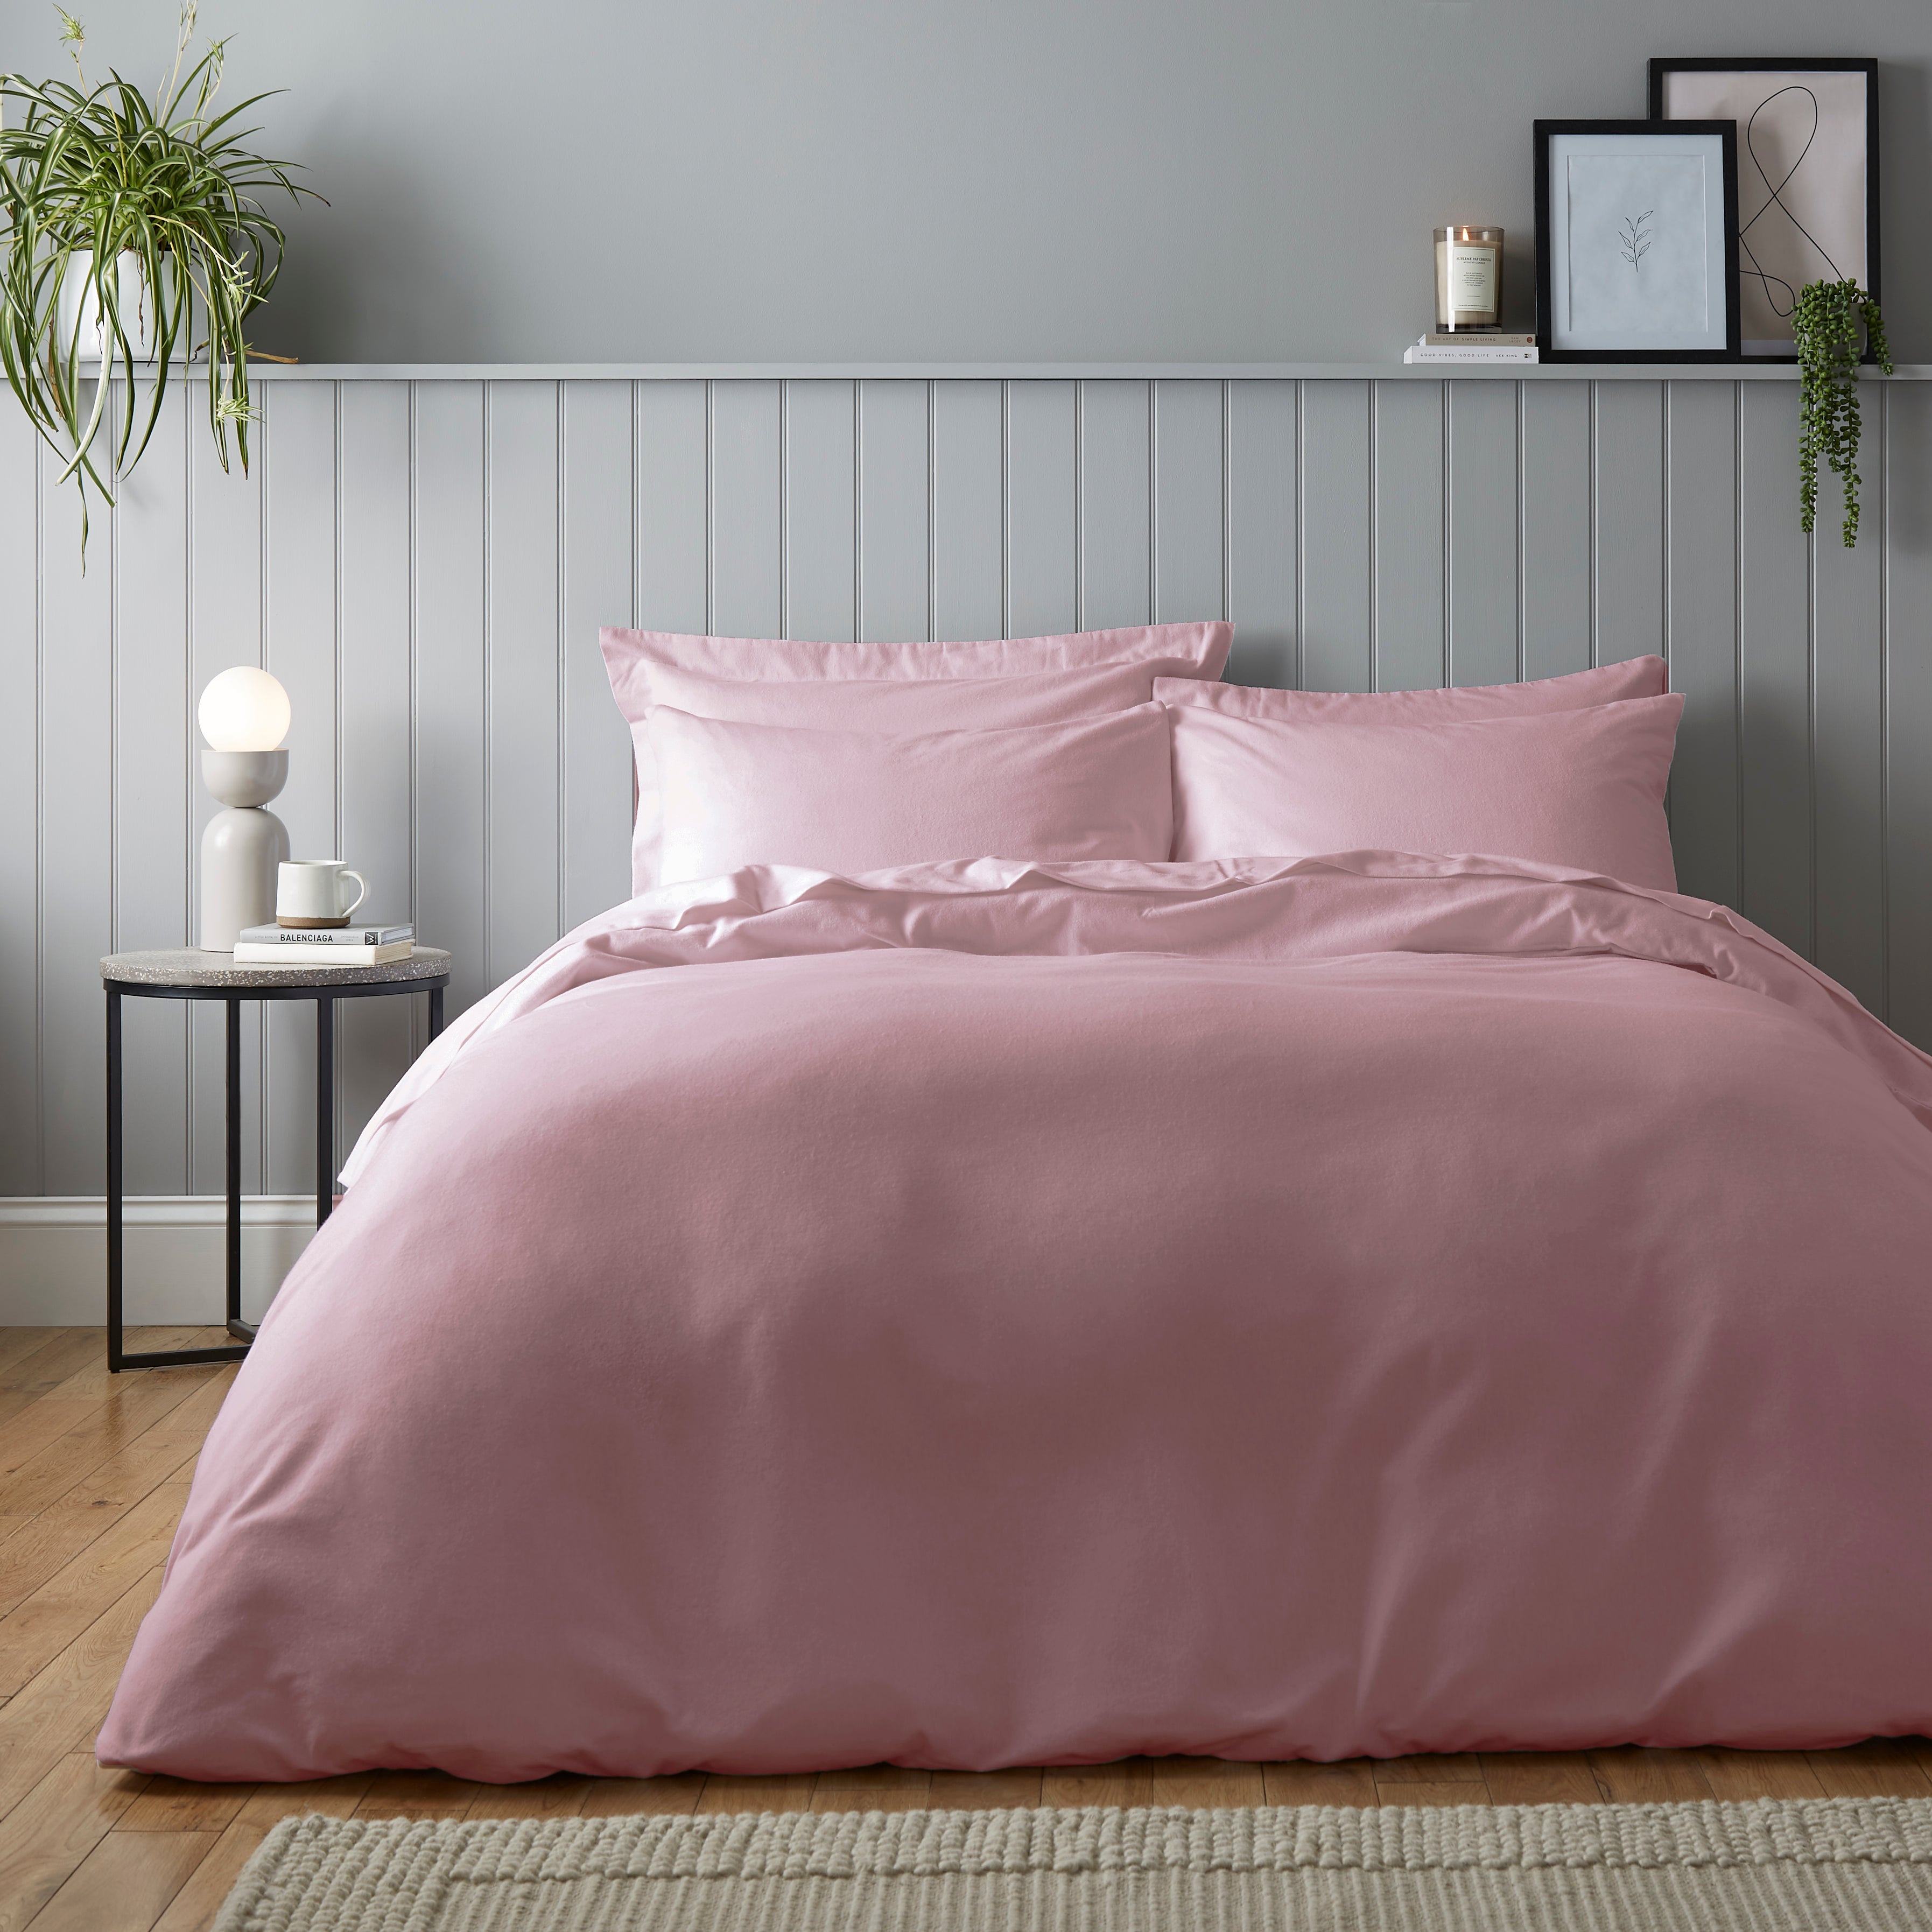 Soft Cosy Luxury Brushed Cotton Duvet Cover And Pillowcase Set Blush Pink